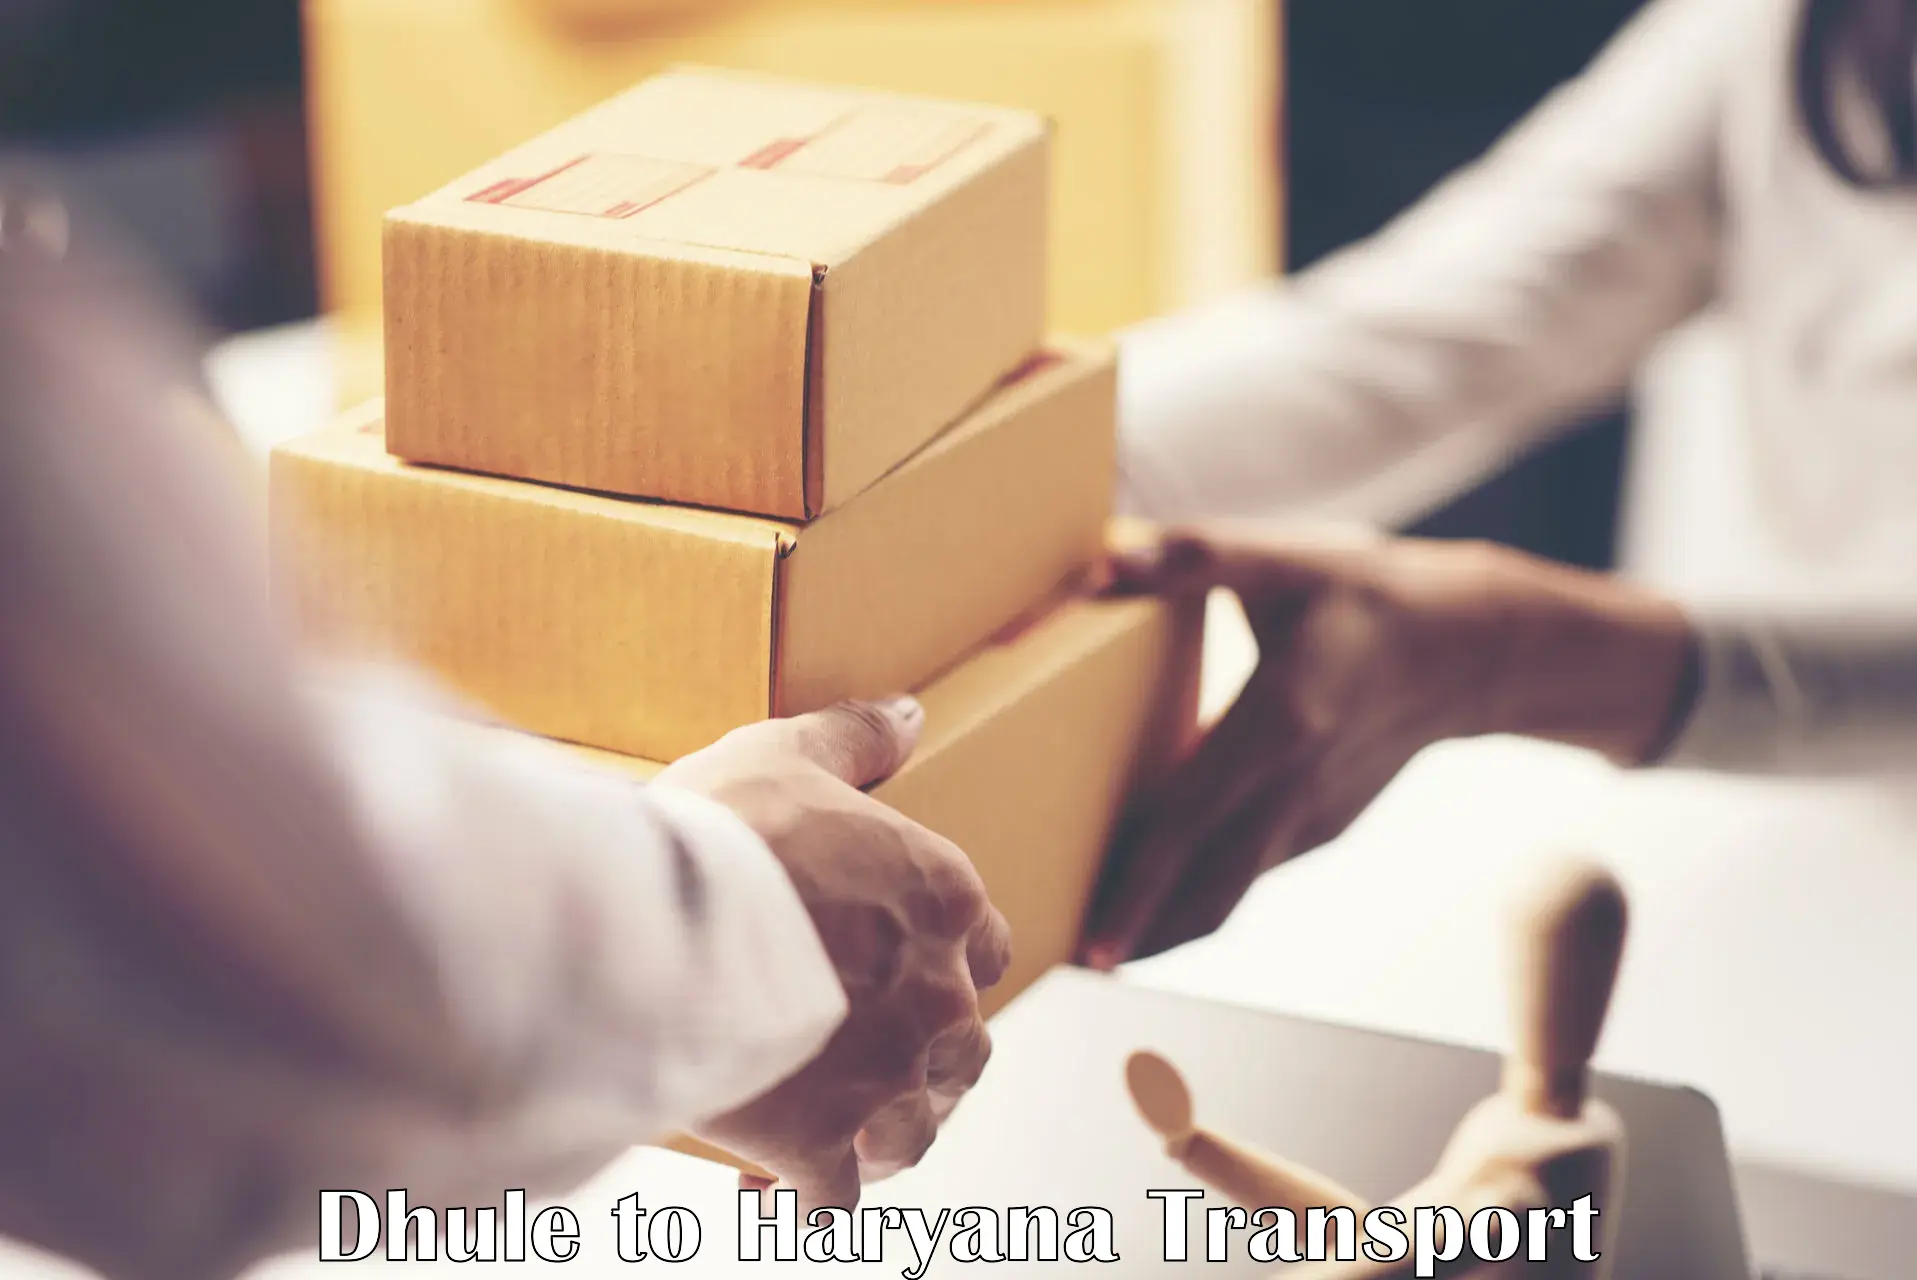 Material transport services Dhule to Bilaspur Haryana